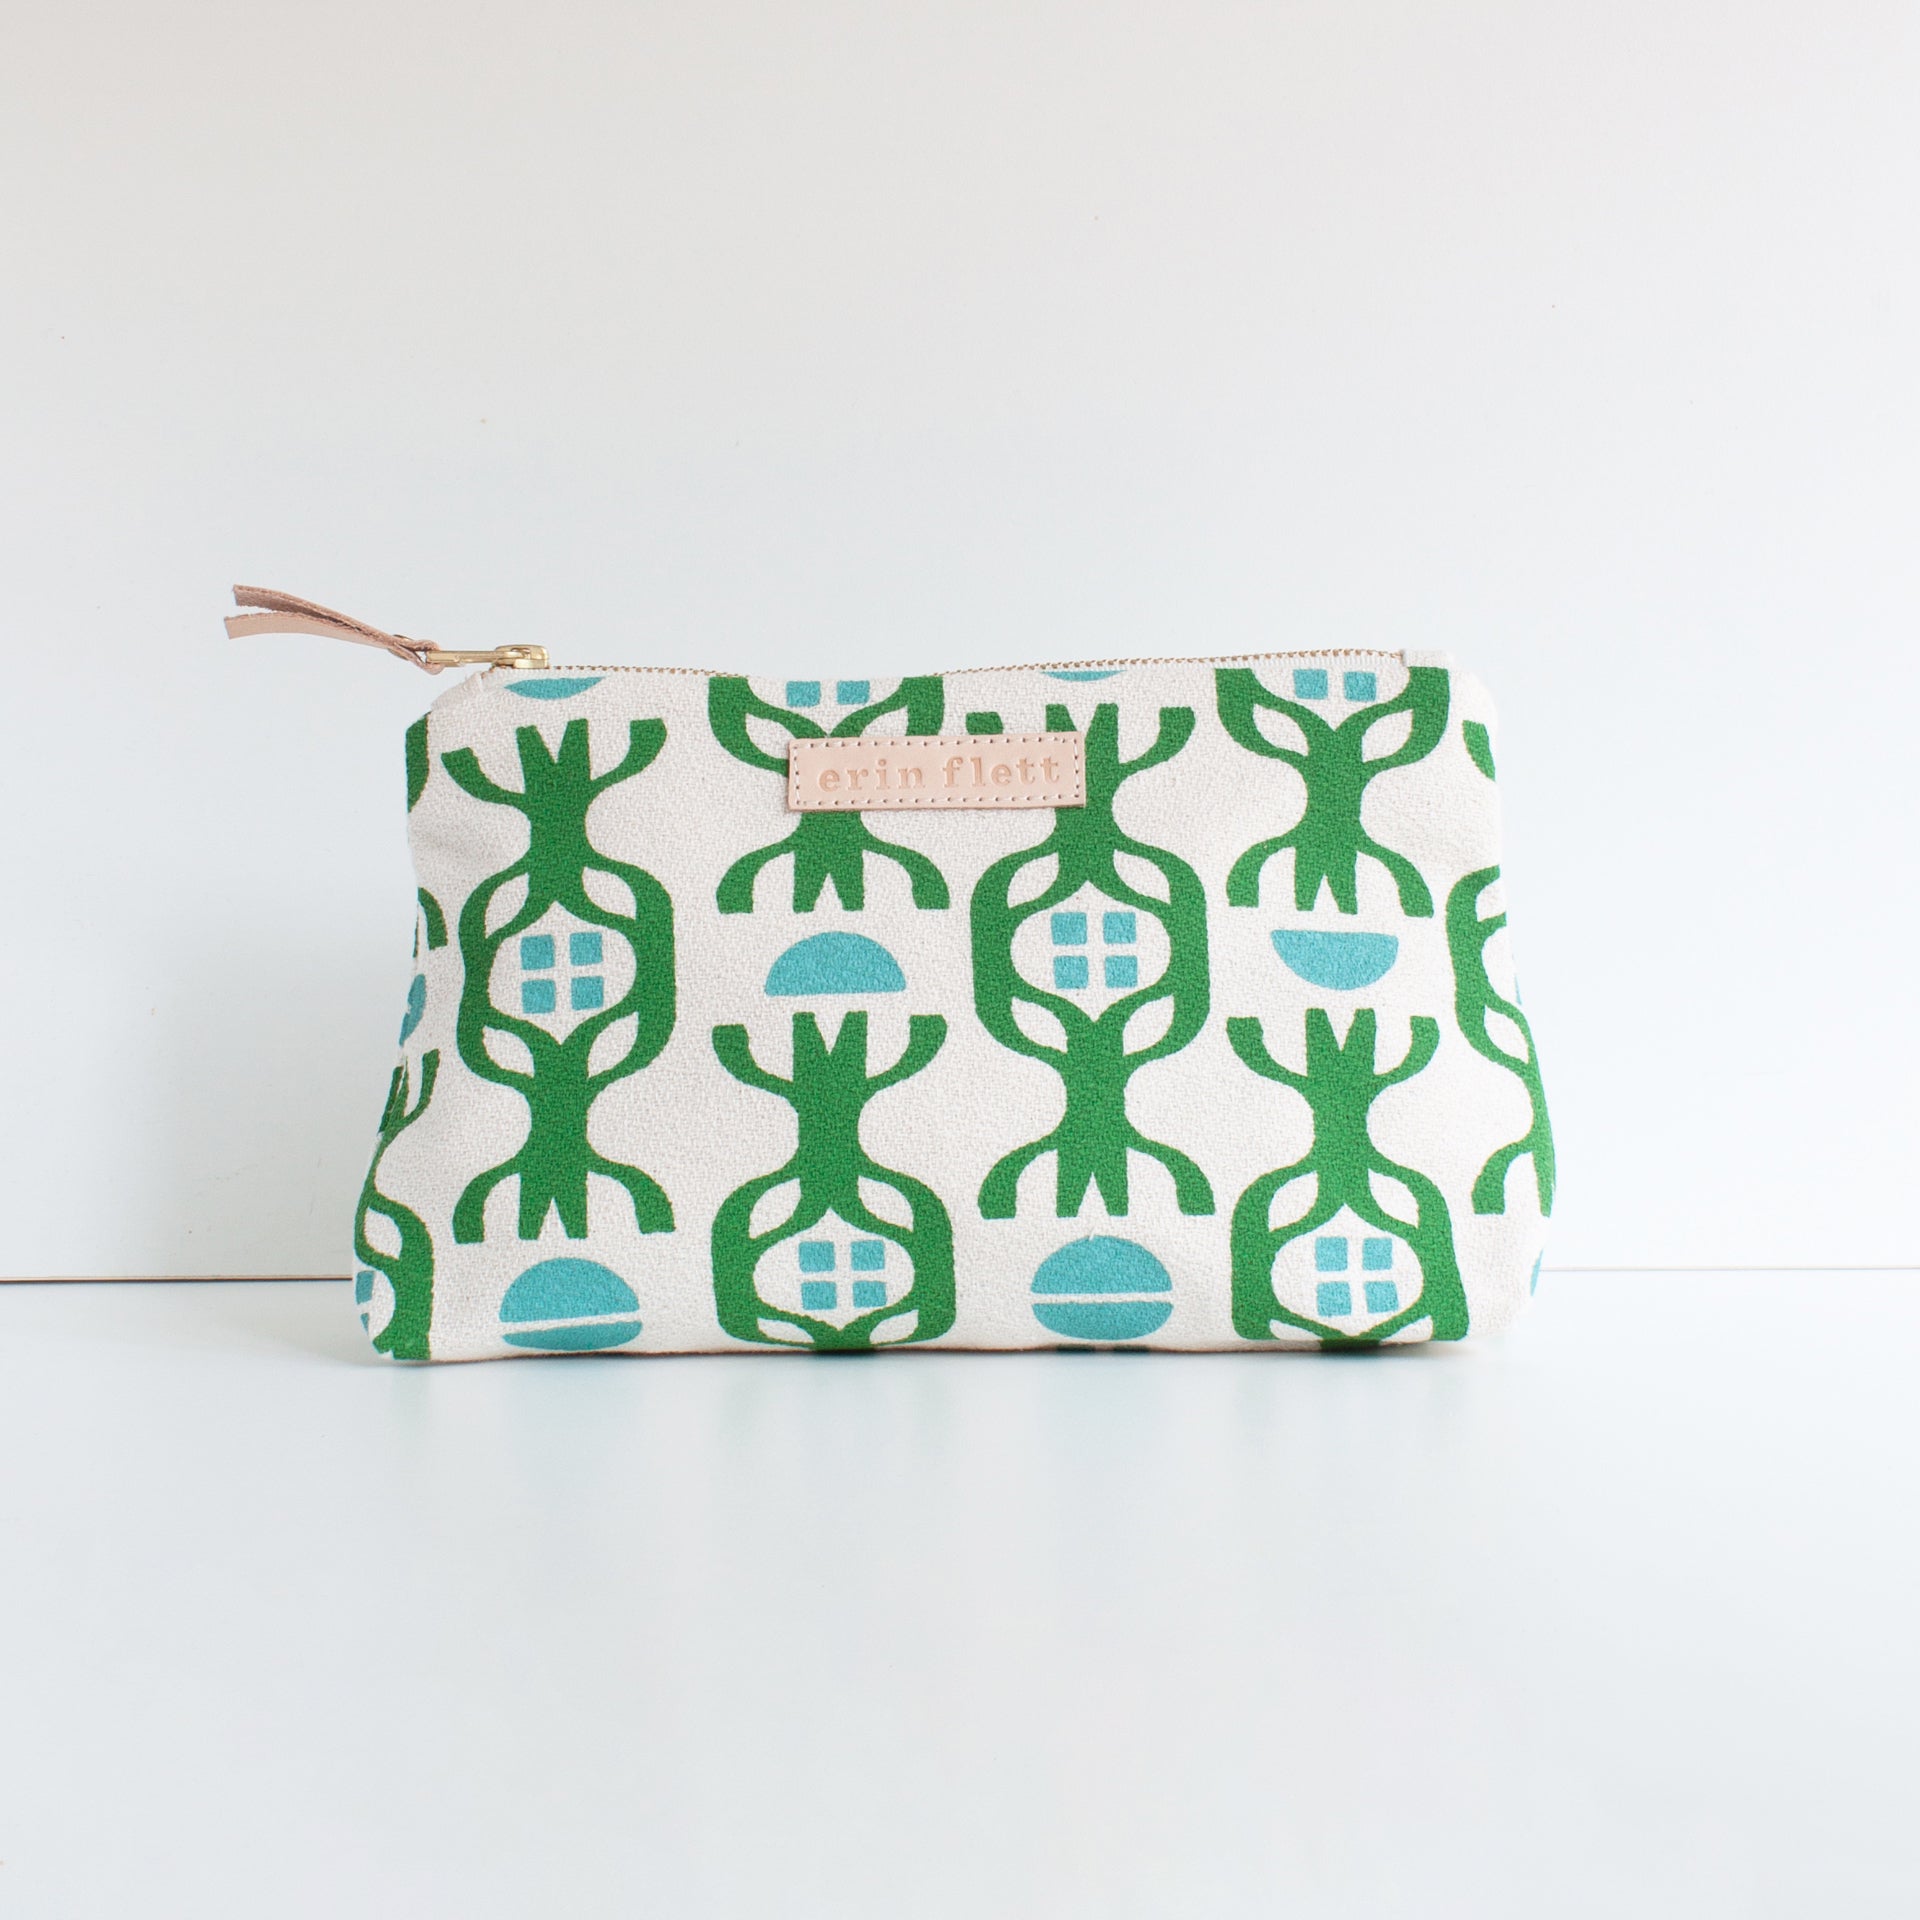 KELLY GREEN + TURQUOISE CHALET LAURA BAG